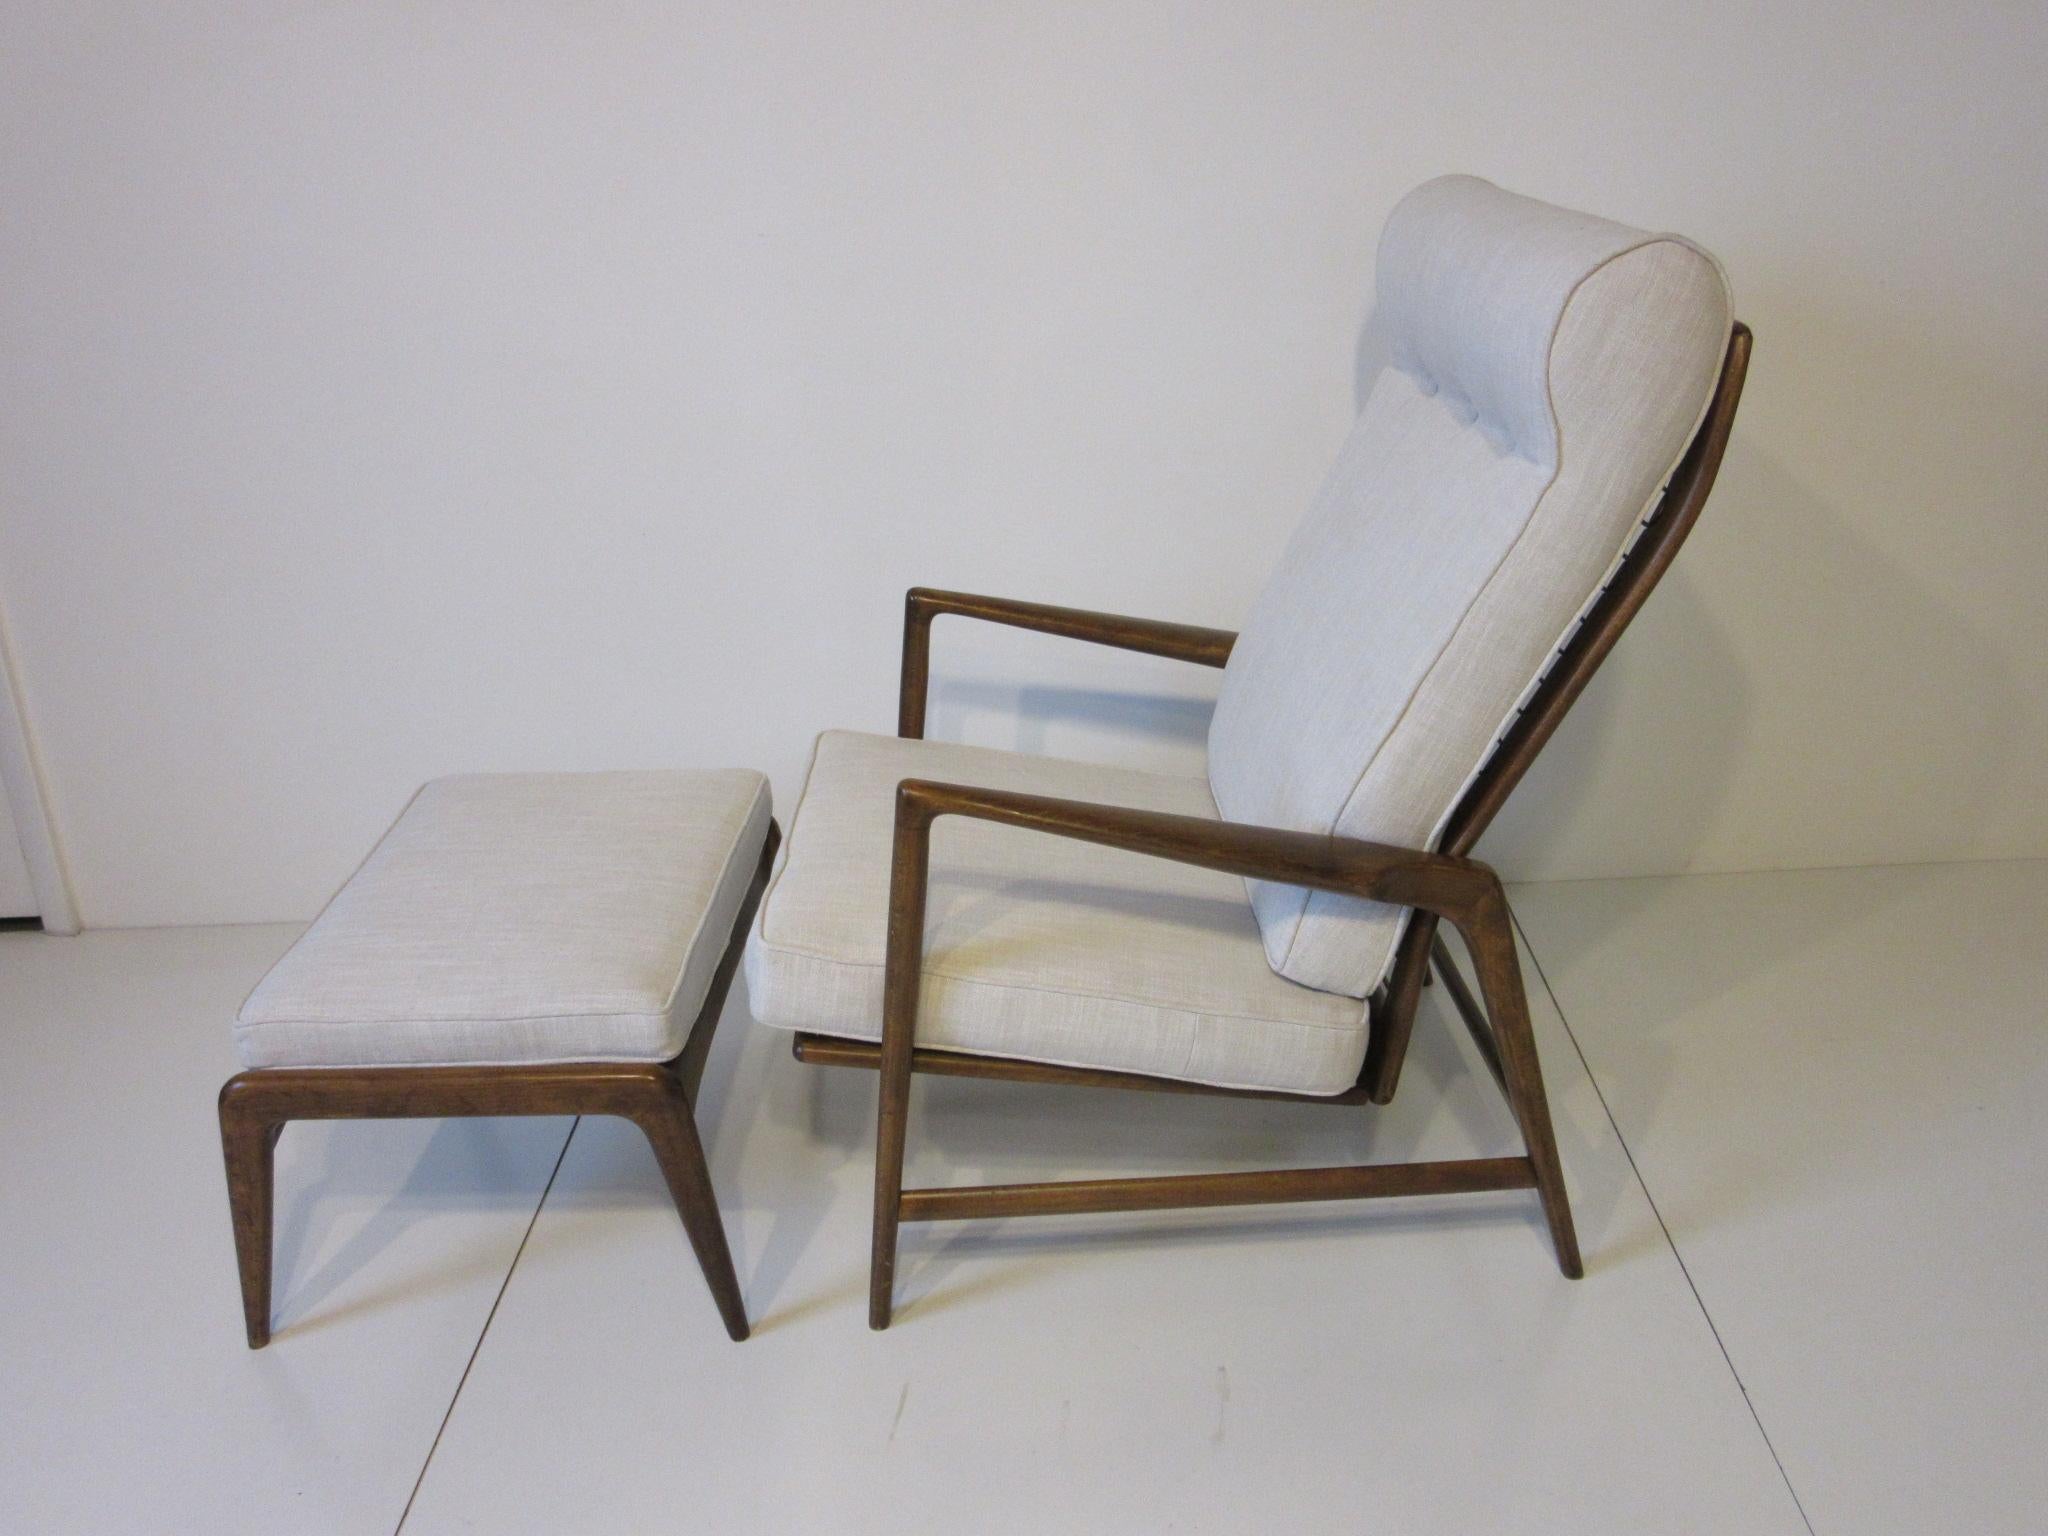 A dark sculptural wood framed lounge chair and matching ottoman upholstered in a darker cream linen fabric. The chair has a four way adjustable reclining backside using a small cast brass knob to one side which gives you more options for comfort,